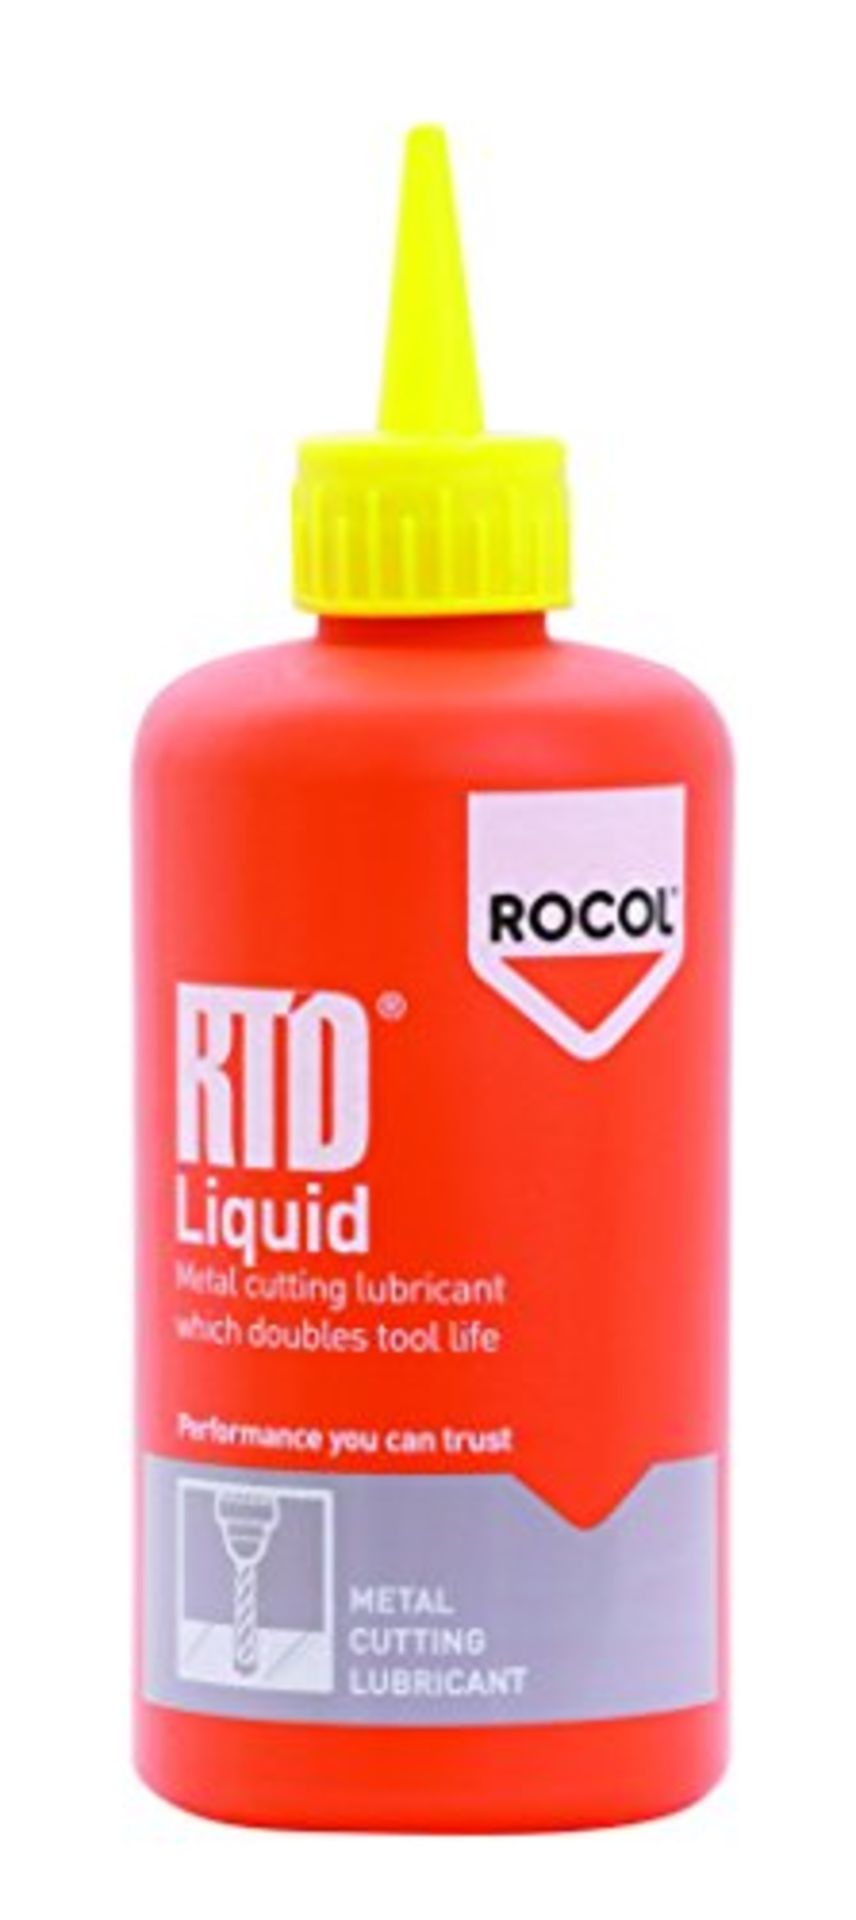 17 x Rocol consumables, as listed | RRP £ 300.78 - Image 5 of 5